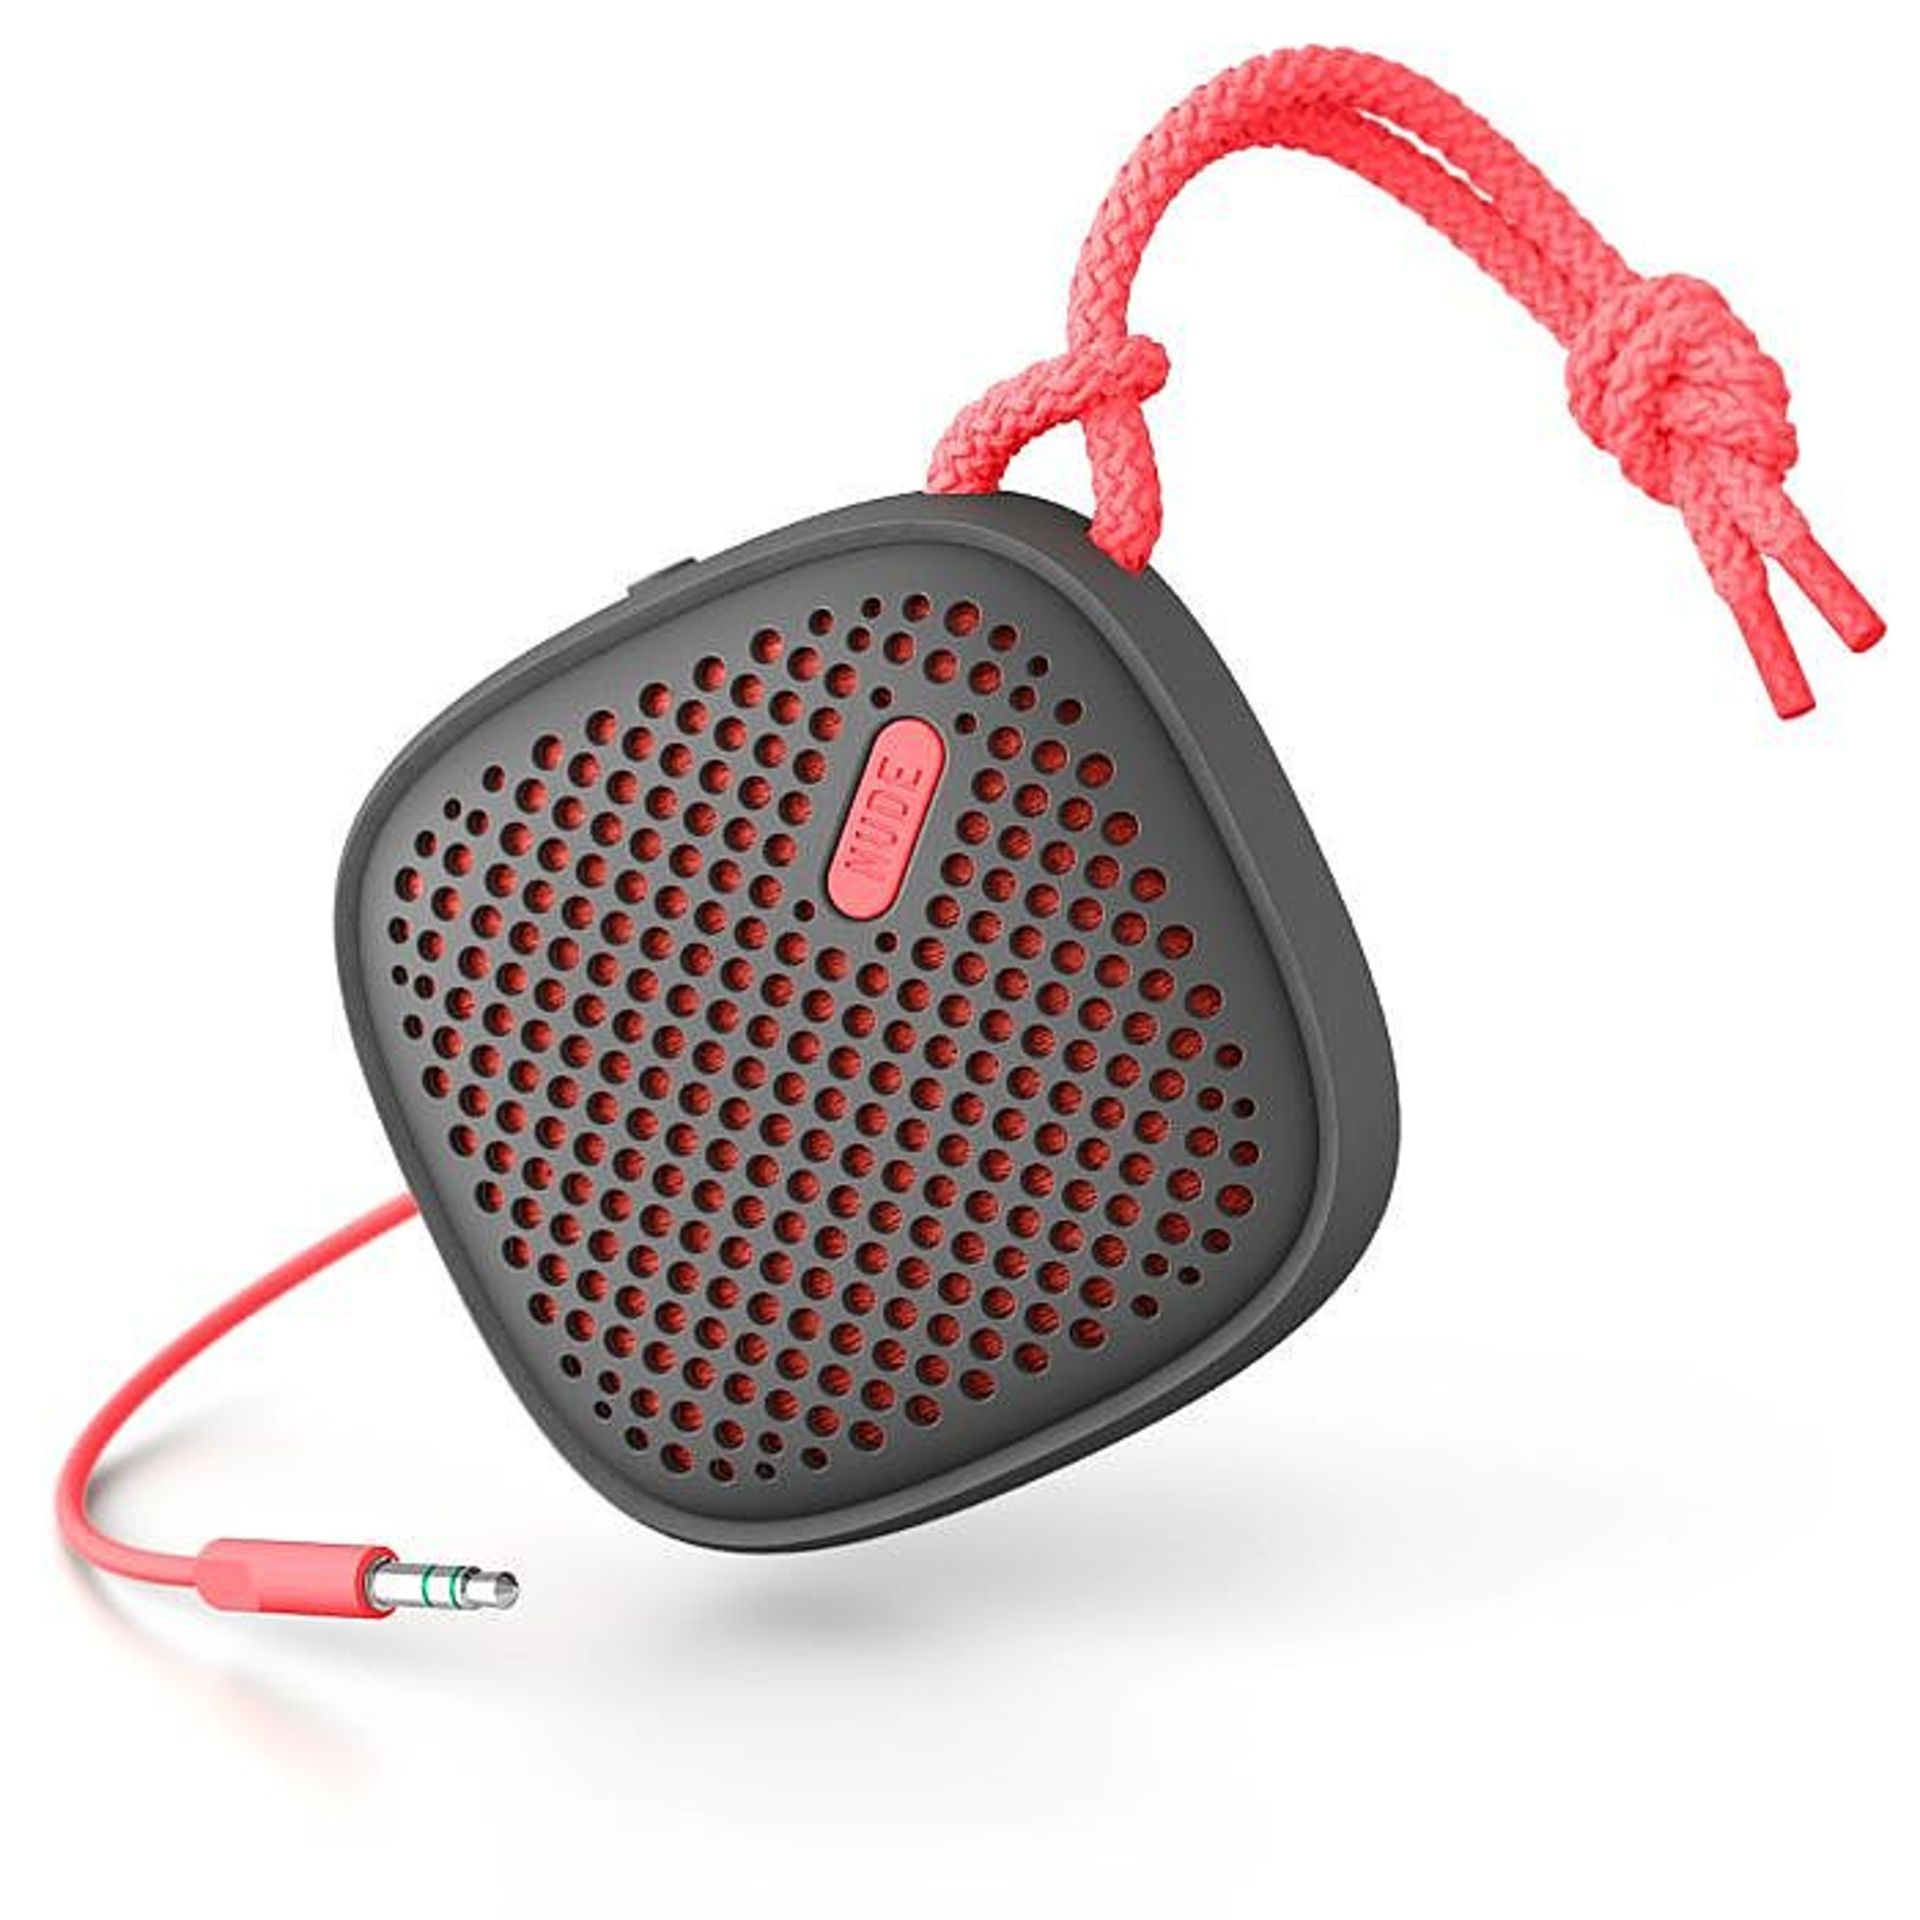 V *TRADE QTY* Brand New Nude Audio Move S Wired Portable Speaker - Coral X 3 YOUR BID PRICE TO BE